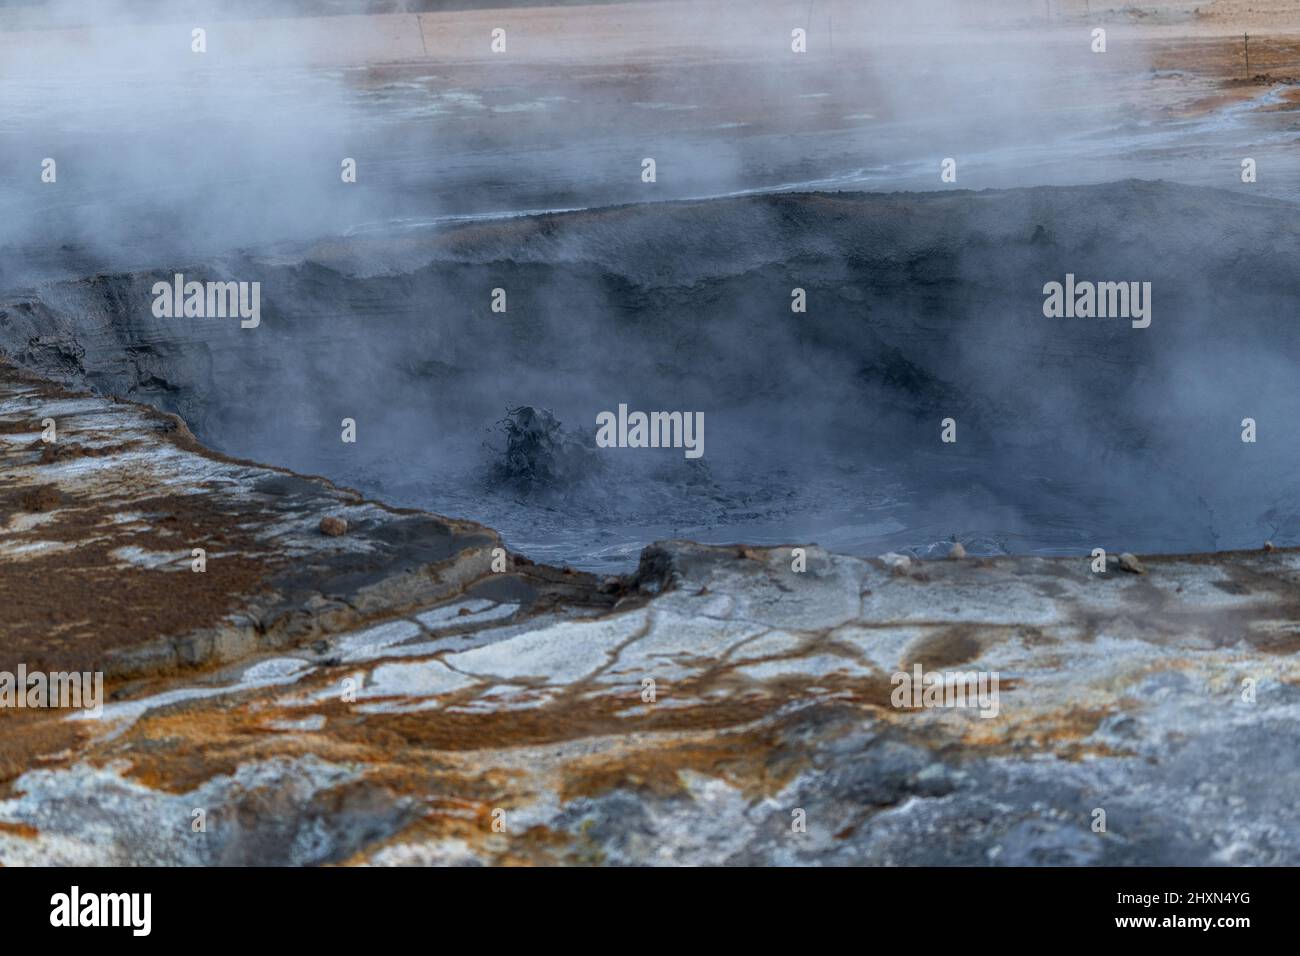 Beautiful aerial view of Namaskard Boiling mud geothermal volcano area in Iceland Stock Photo